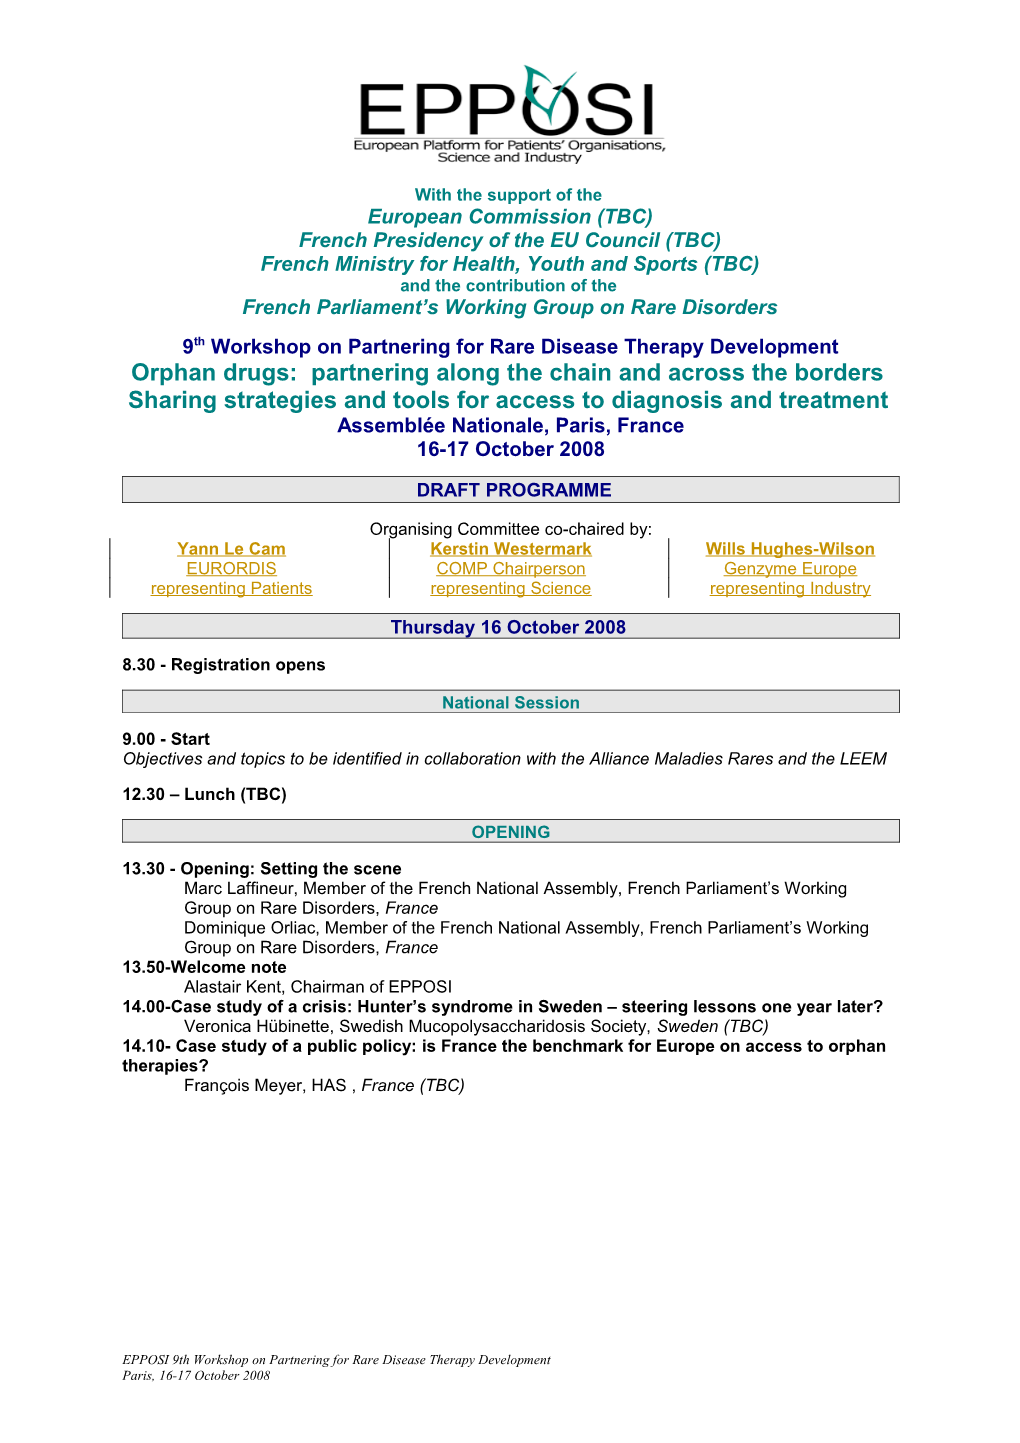 9Th Workshop on Partnering for Rare Disease Therapy Development